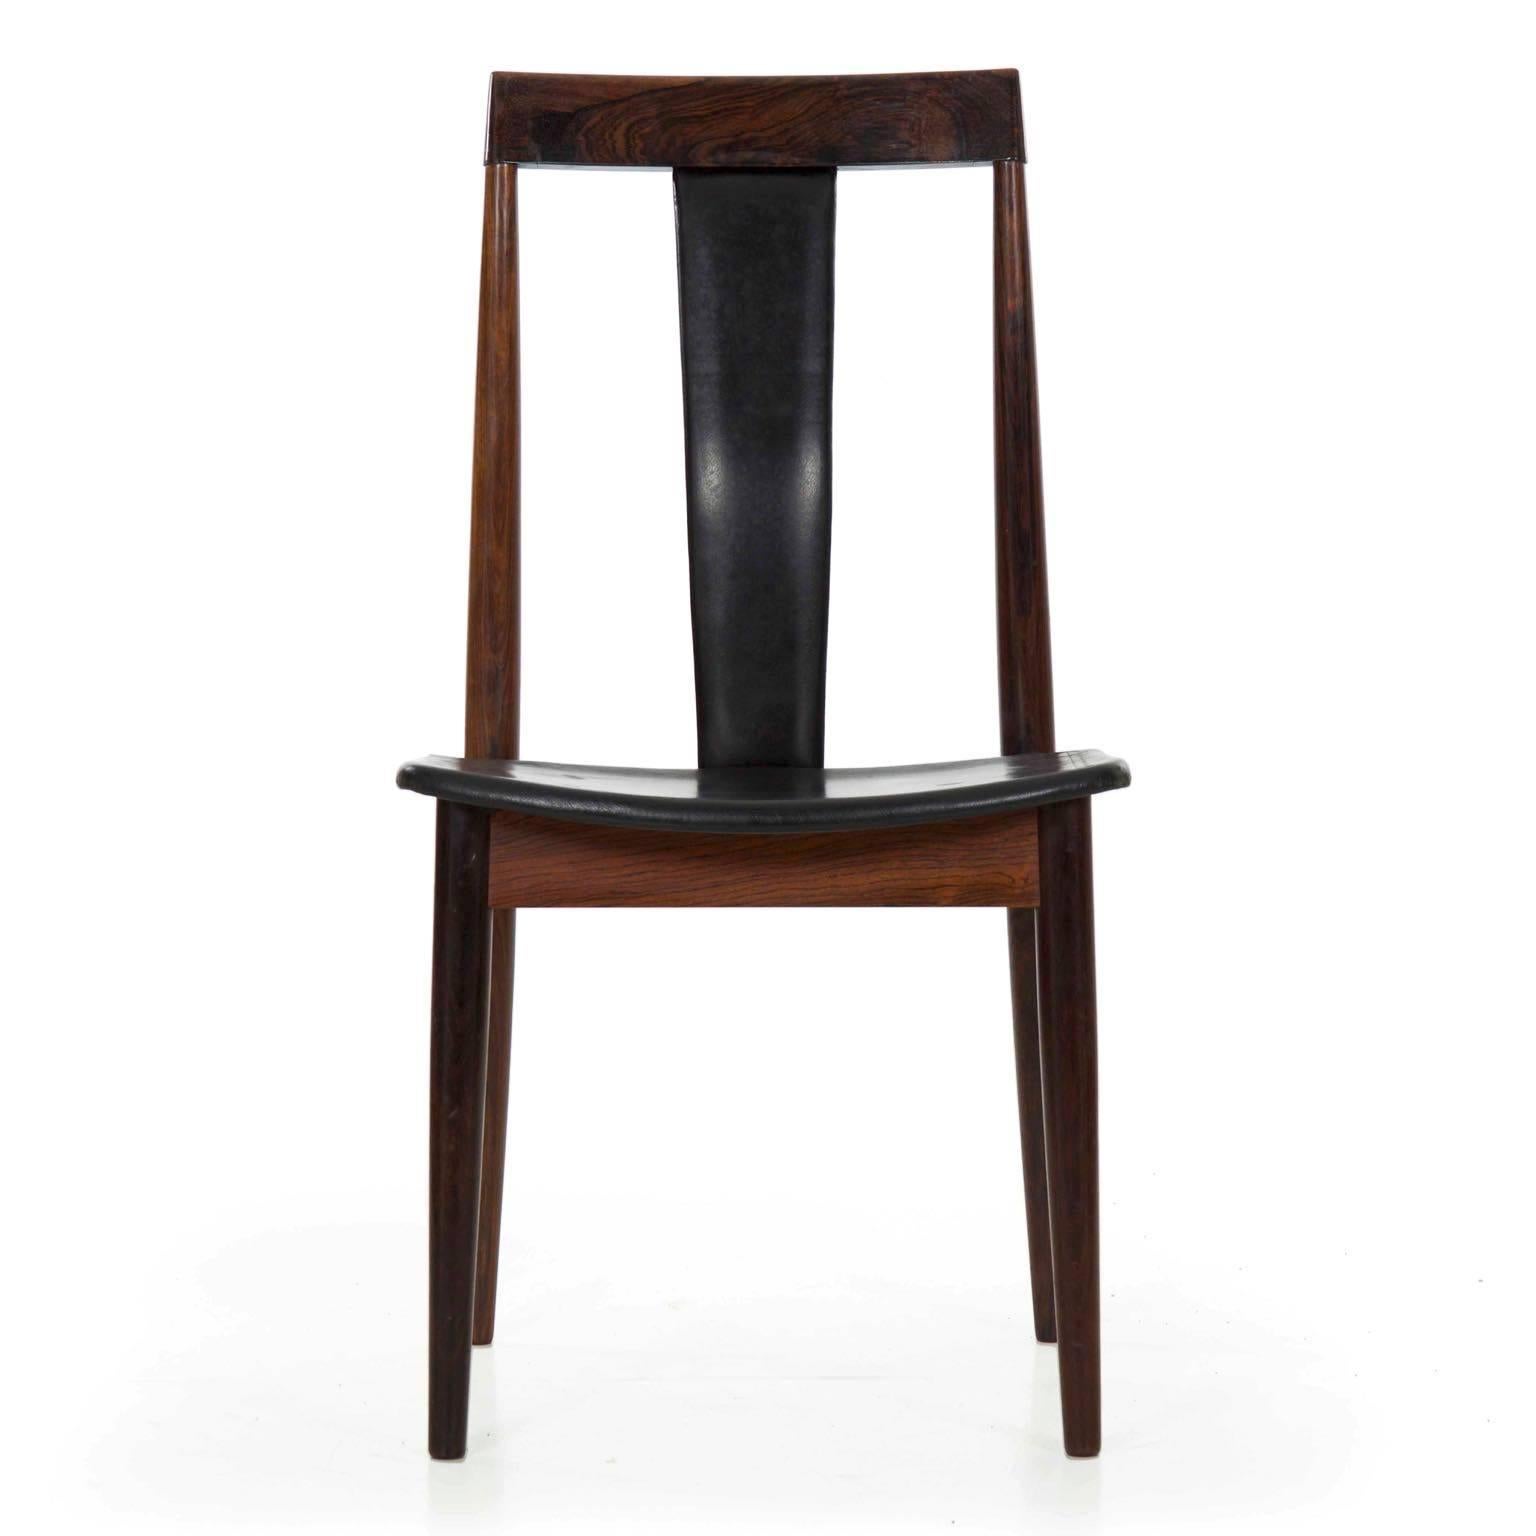 This is a relatively uncommon side chair by Frem Rojle crafted of gorgeous solid rosewood framing, the interesting curving spine of the splat operating independently from the stiles and locked together into the molded crest. It is a perfect desk